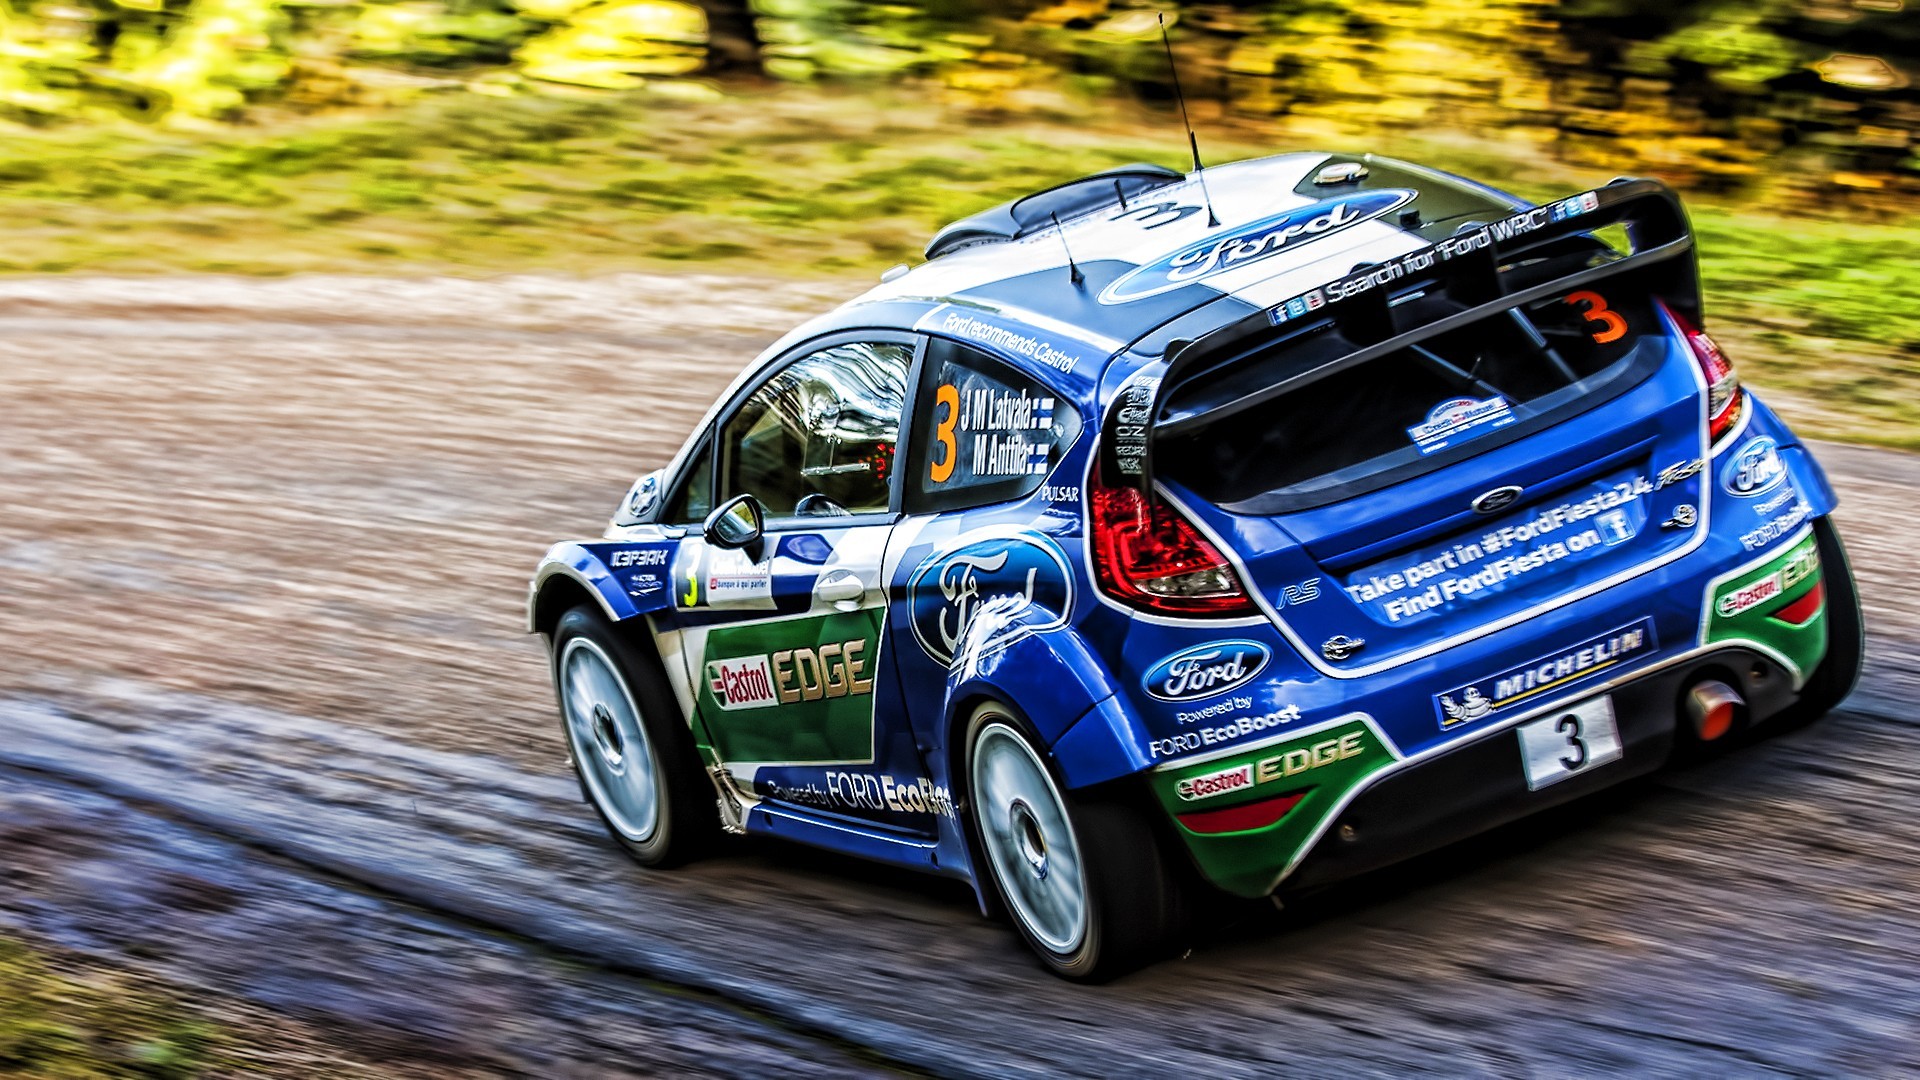 Ford Fiesta Rs Wrc Race Cars Wallpapers Hd Desktop And Mobile Backgrounds 1920x1080